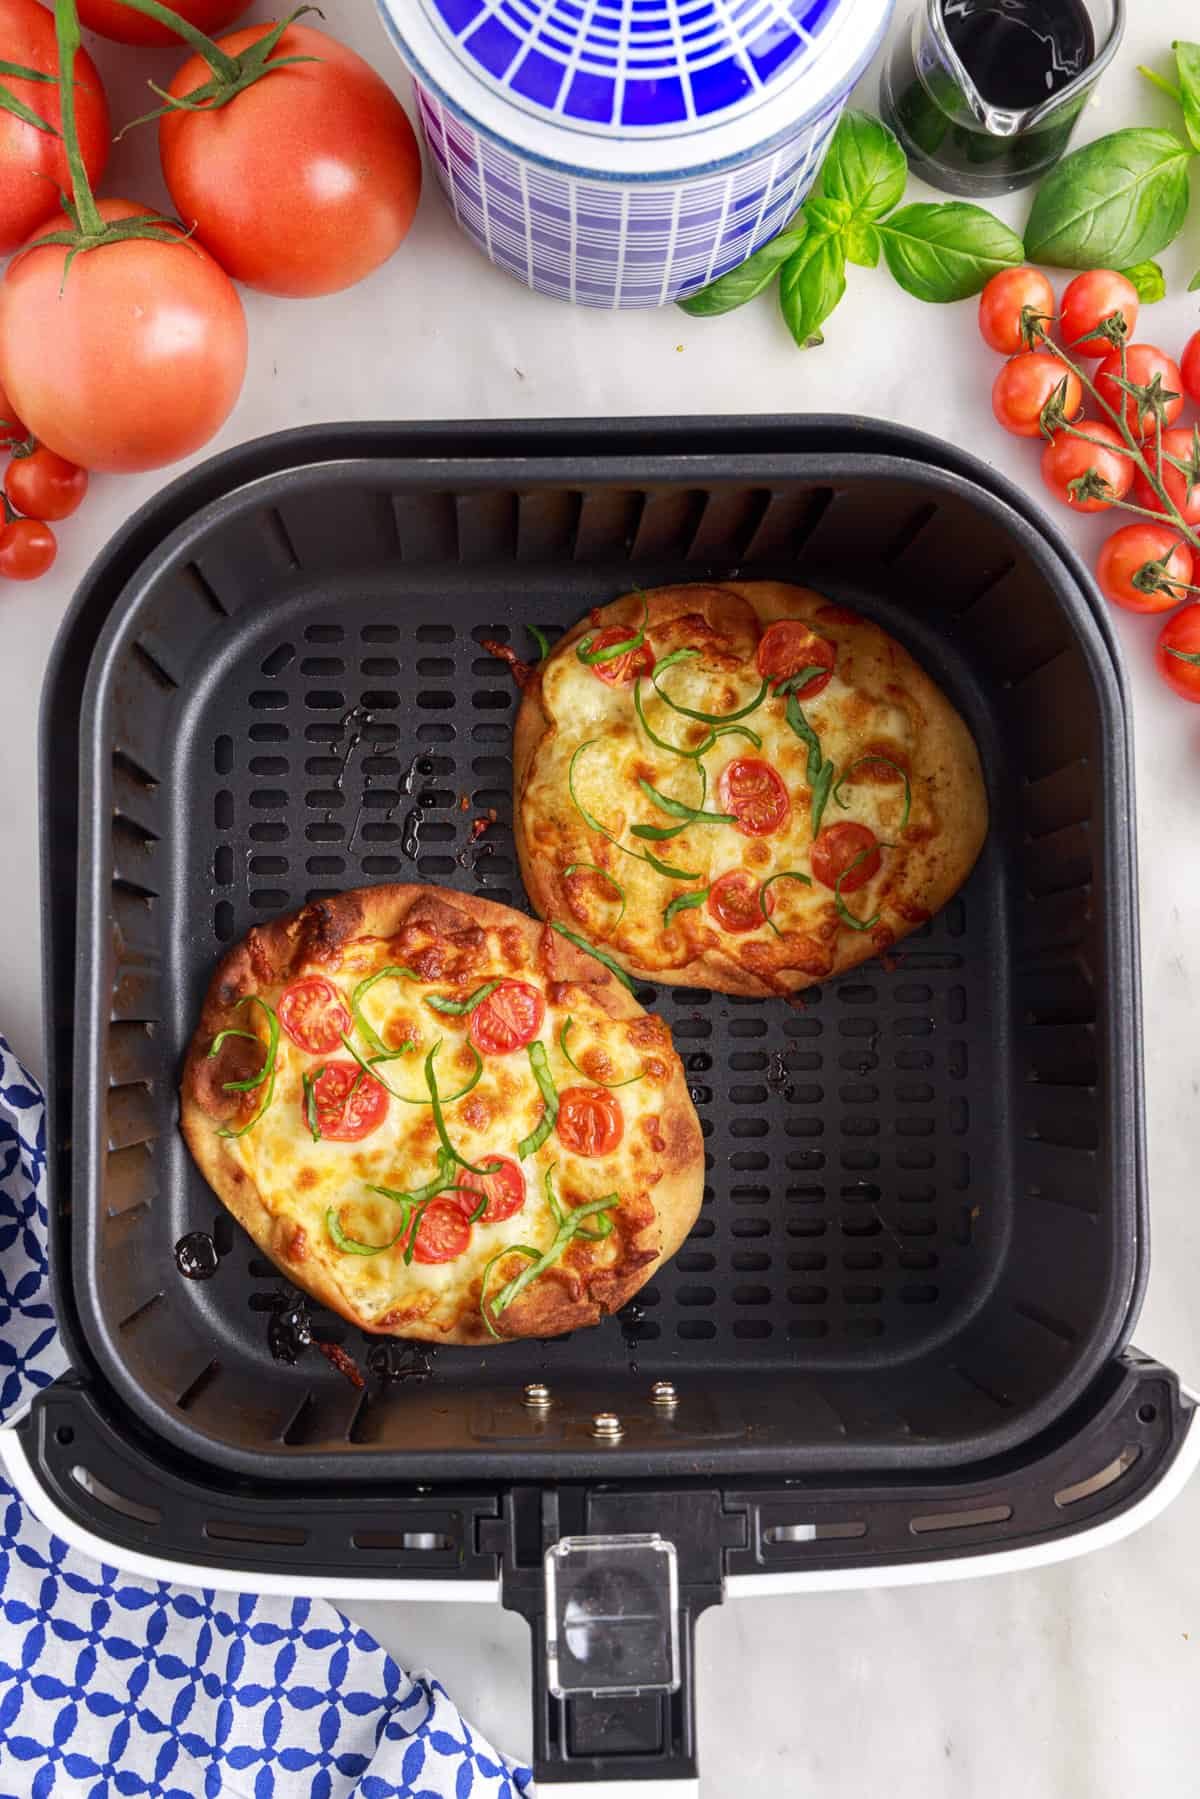 Two cooked pizzas are in the basket of an air fryer.